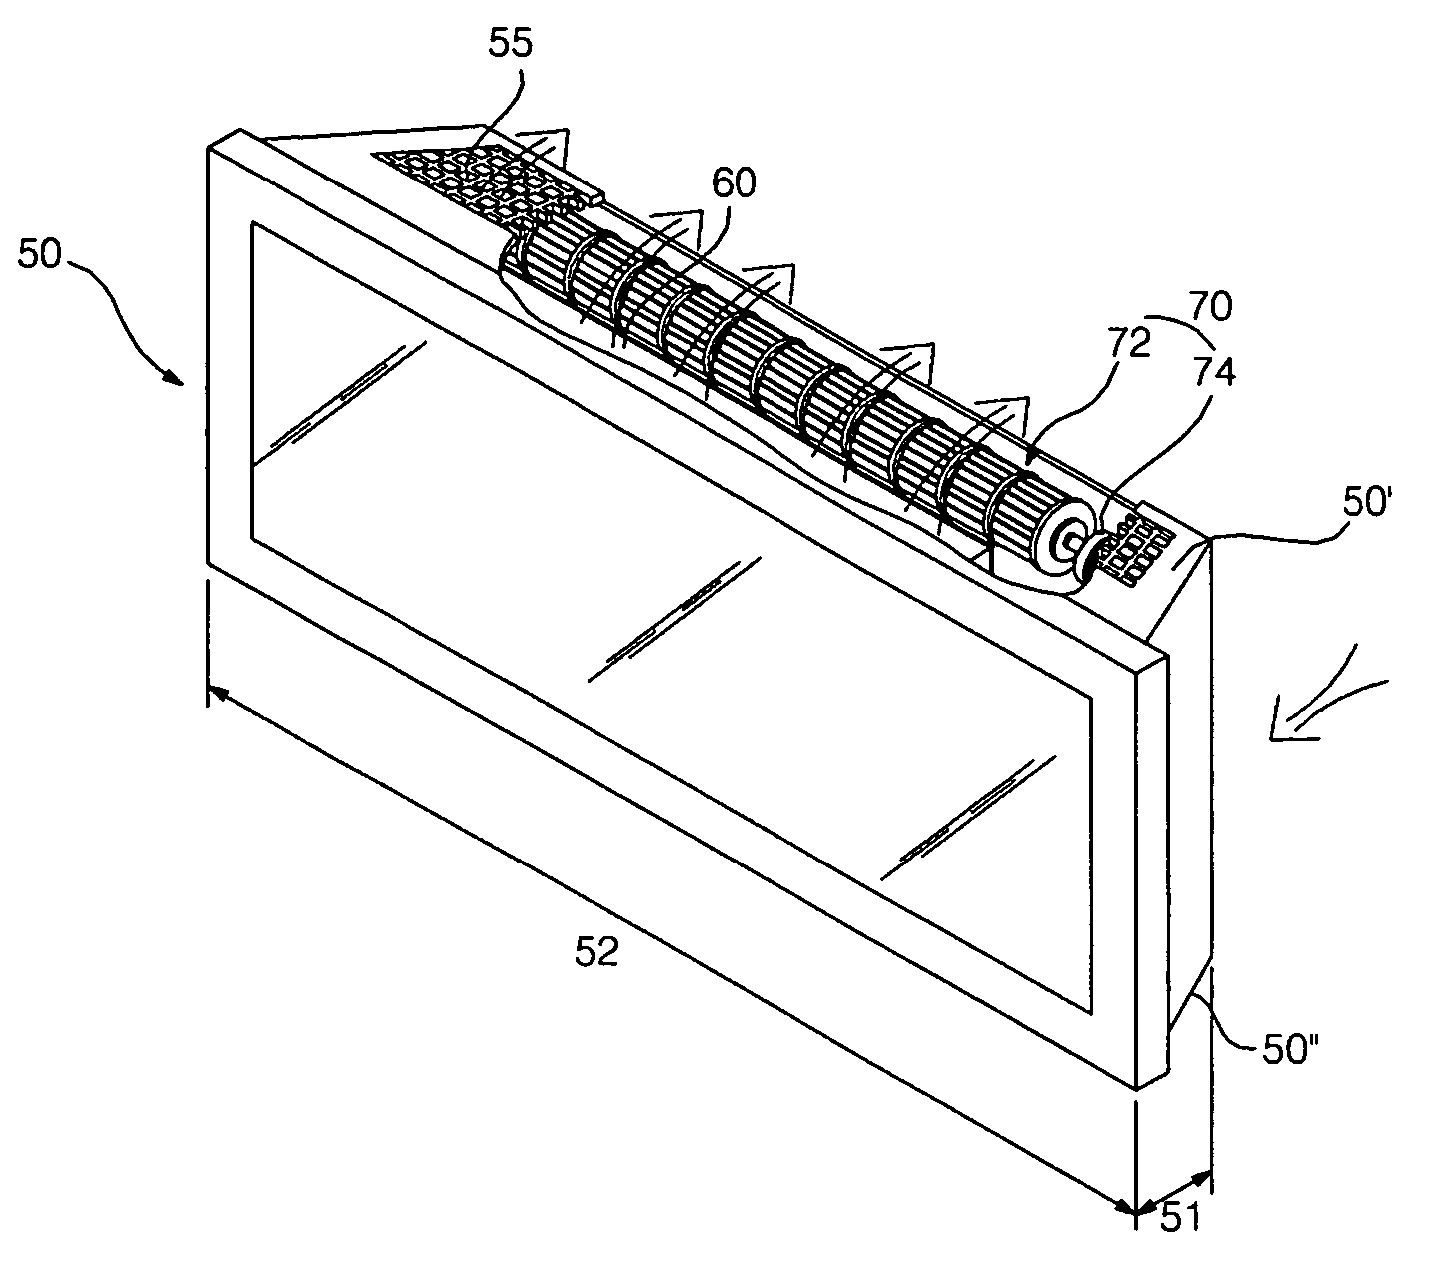 Display device and blower thereof